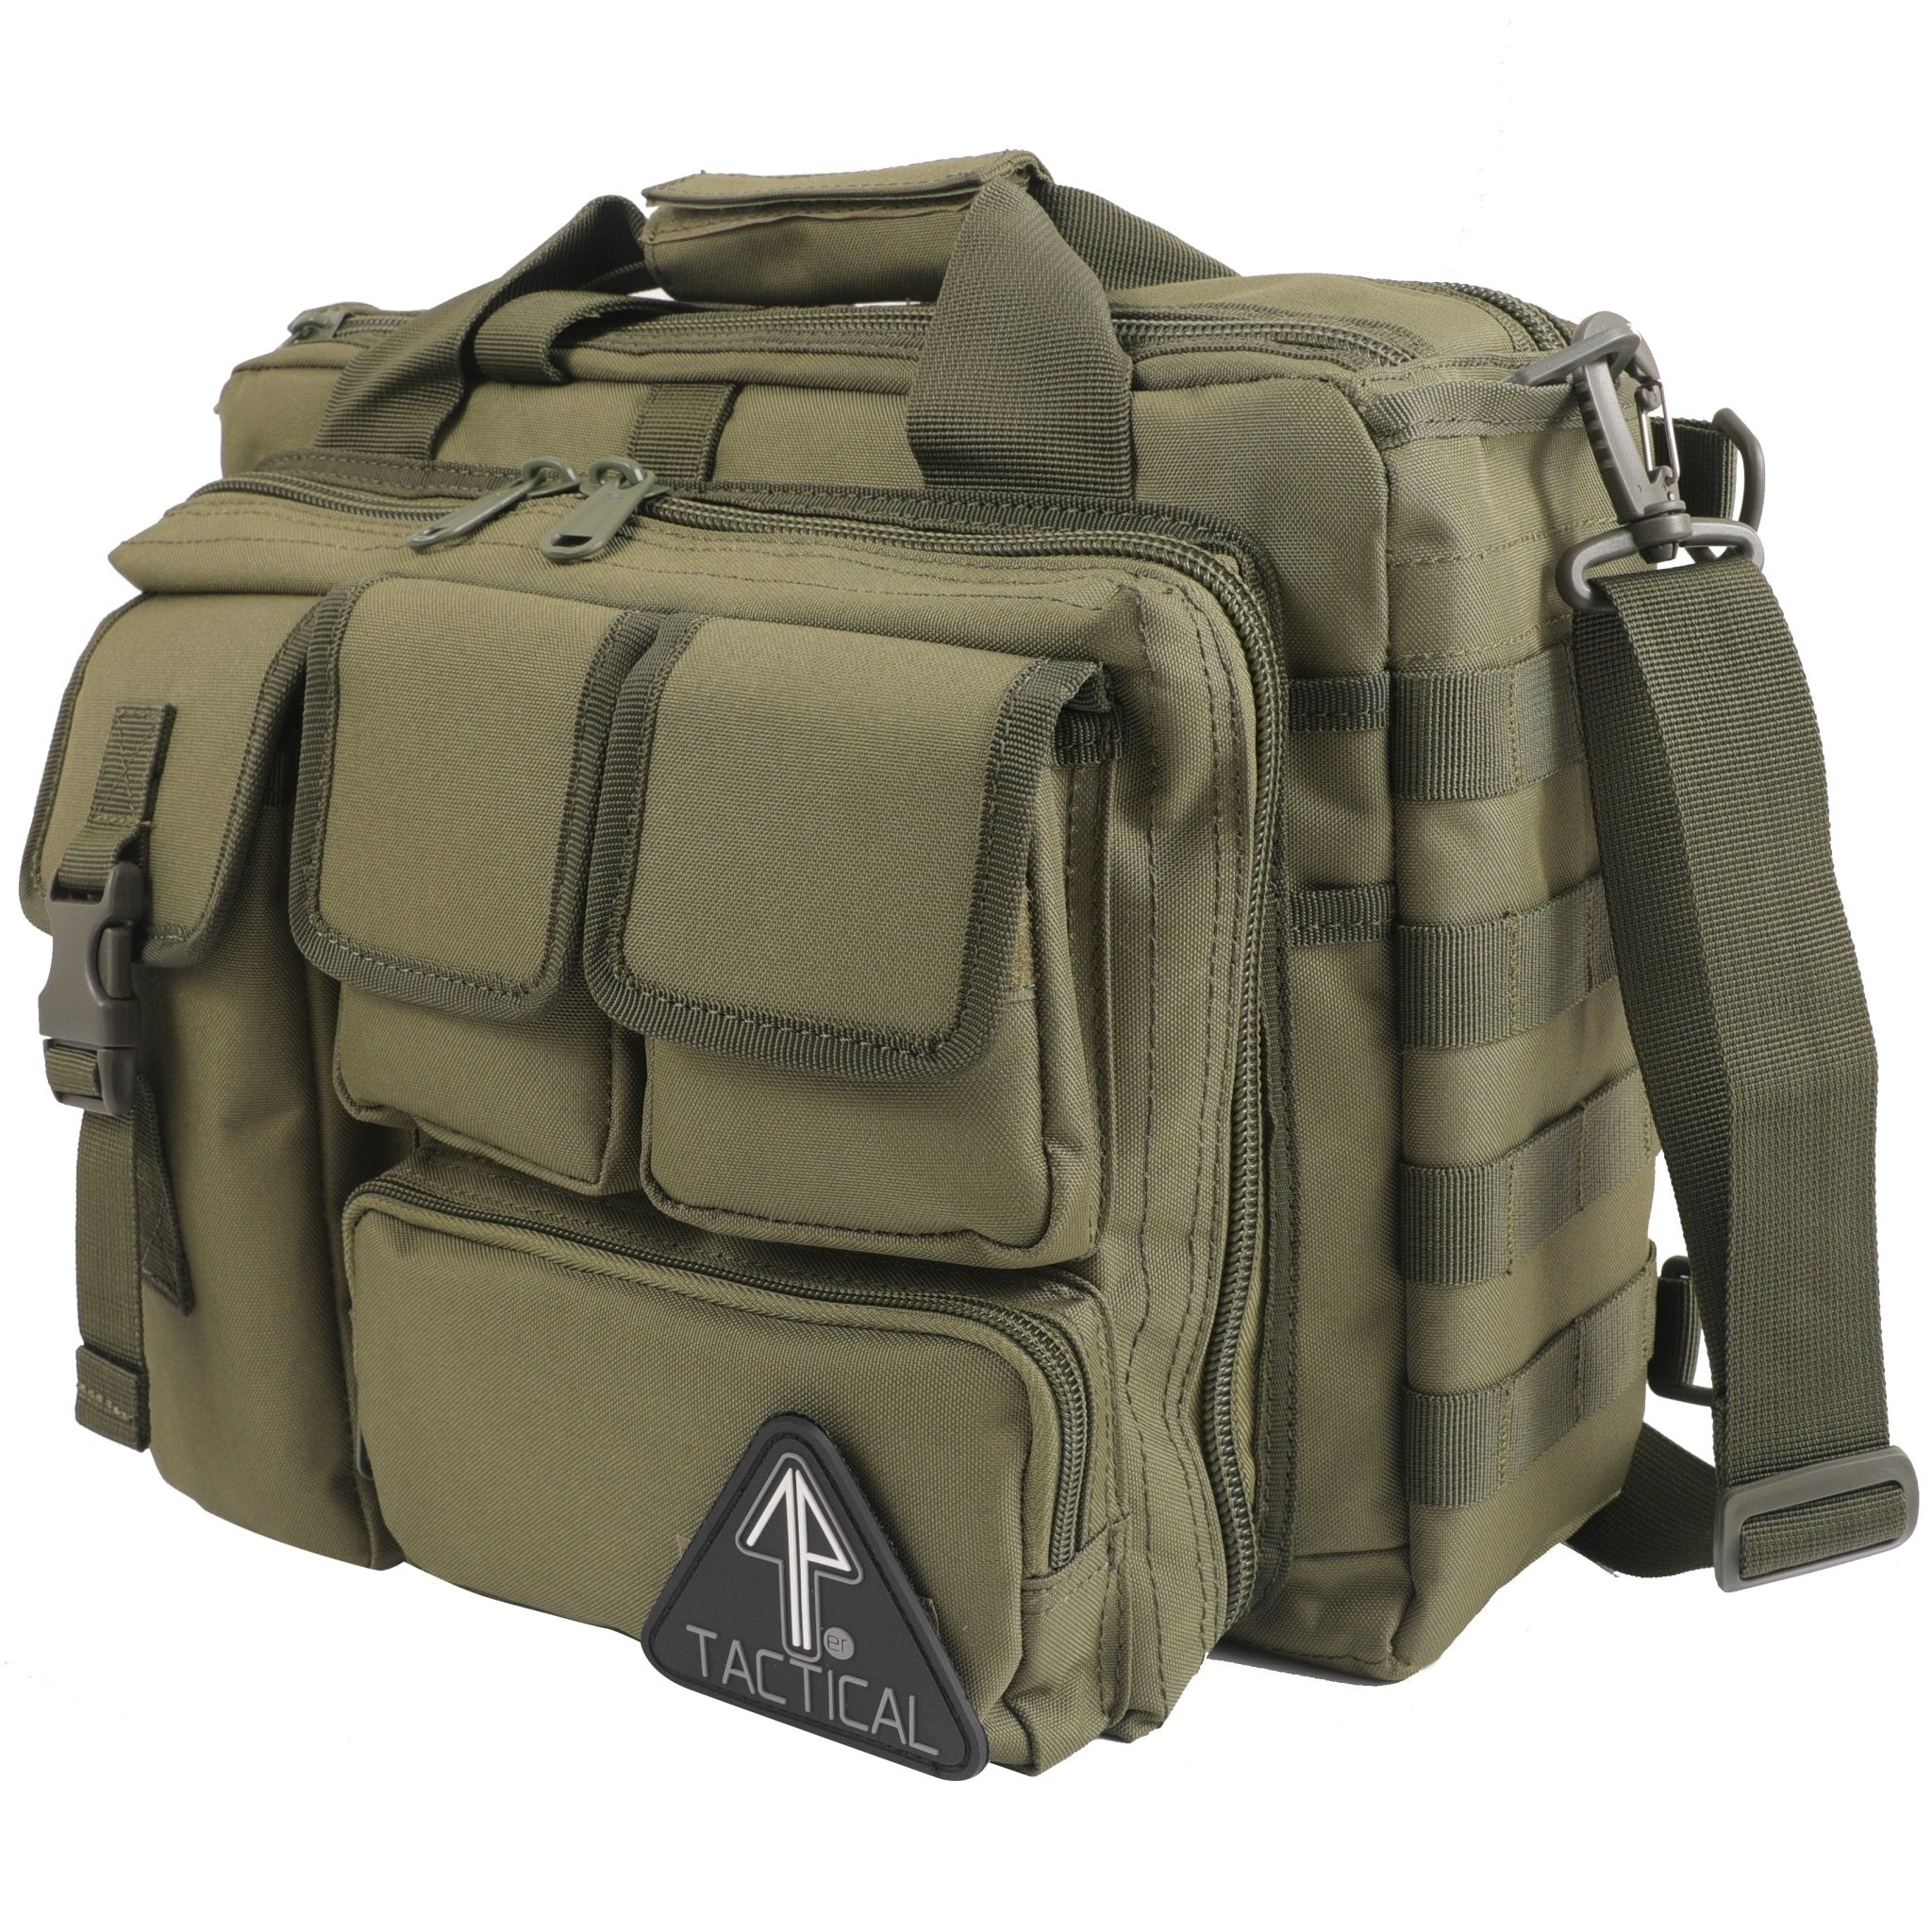 Voodoo Tactical Messenger Bag  15% Off 5 Star Rating w/ Free Shipping